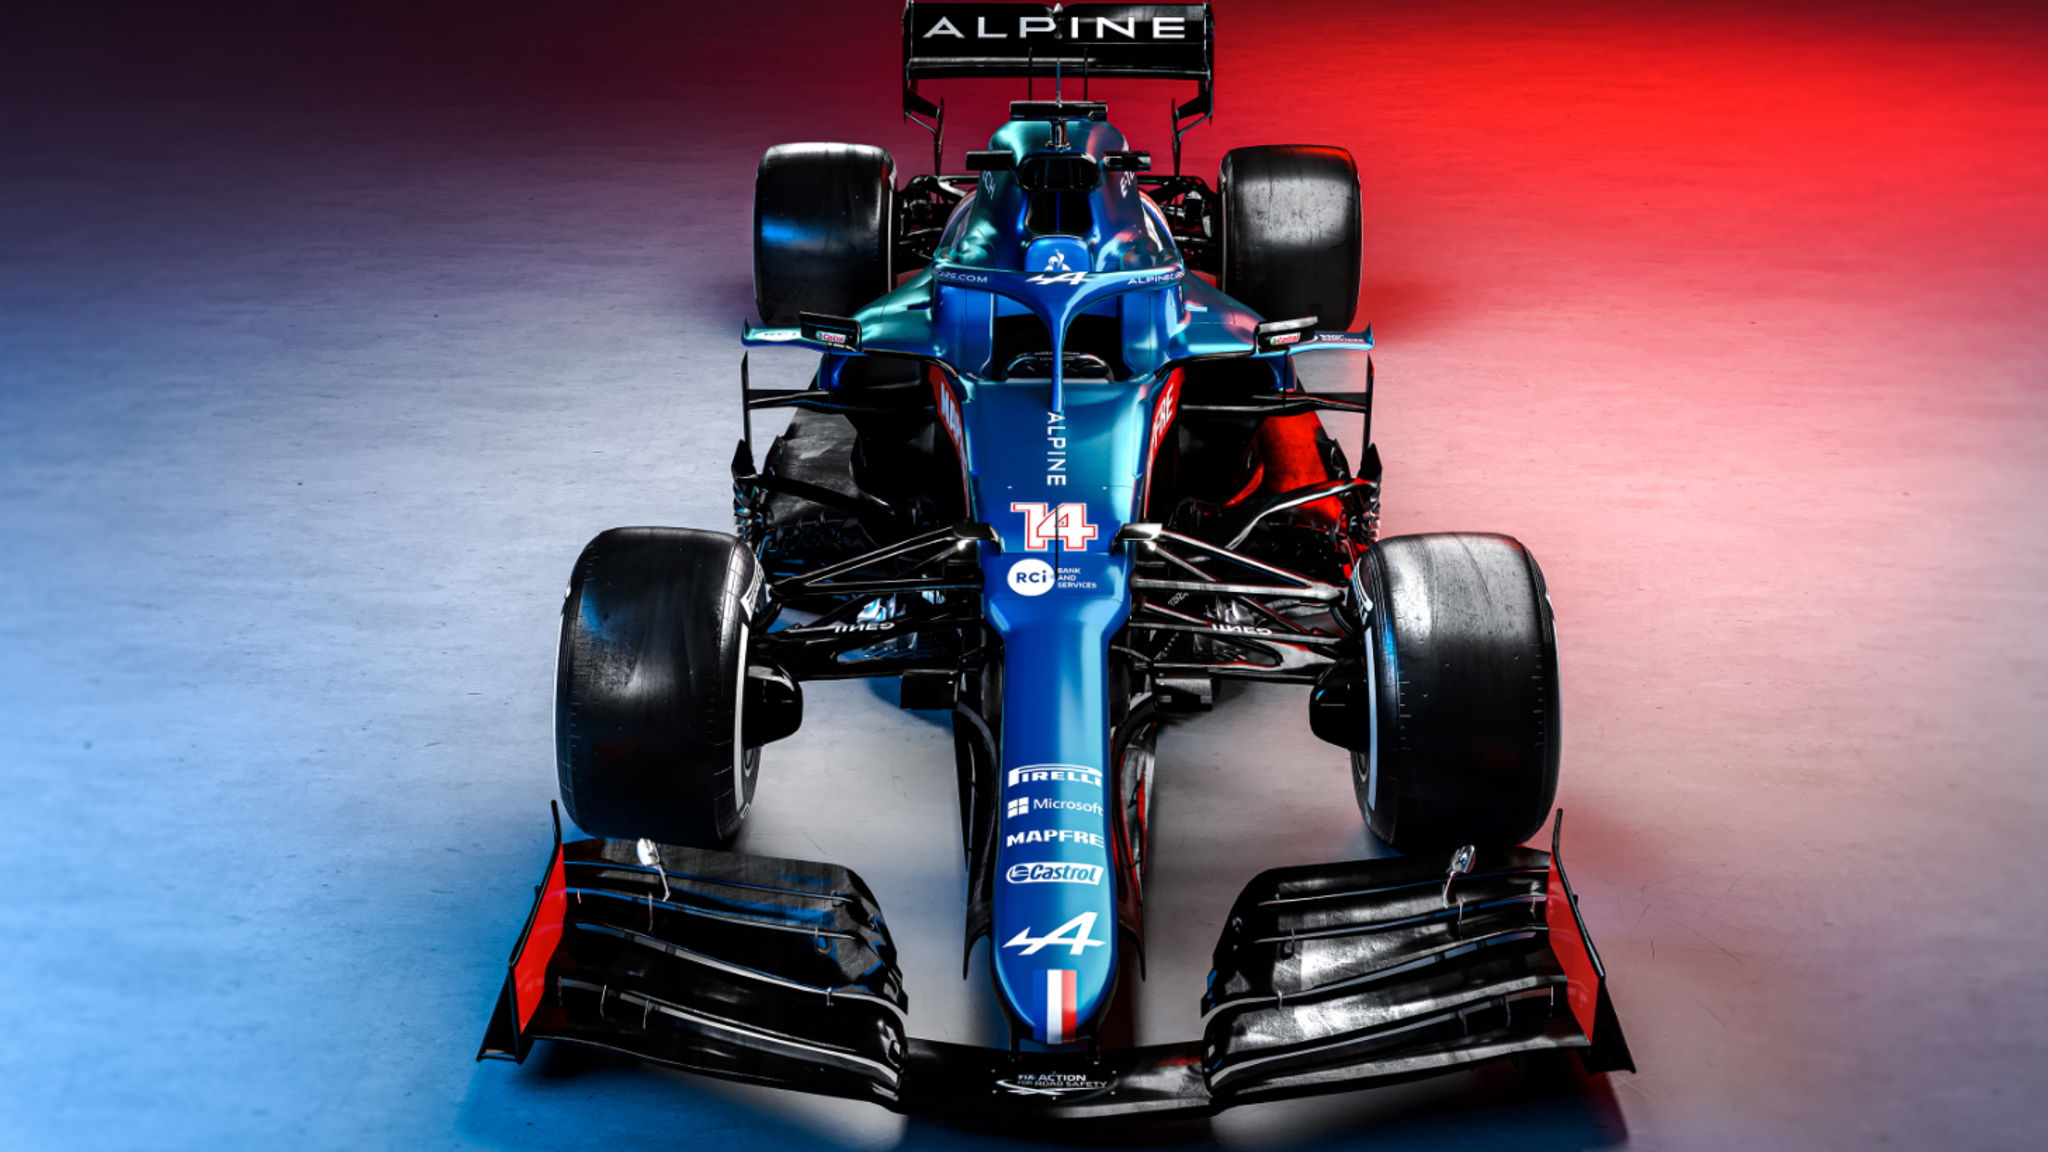 Renault to rebrand as Alpine F1 Team in 2021